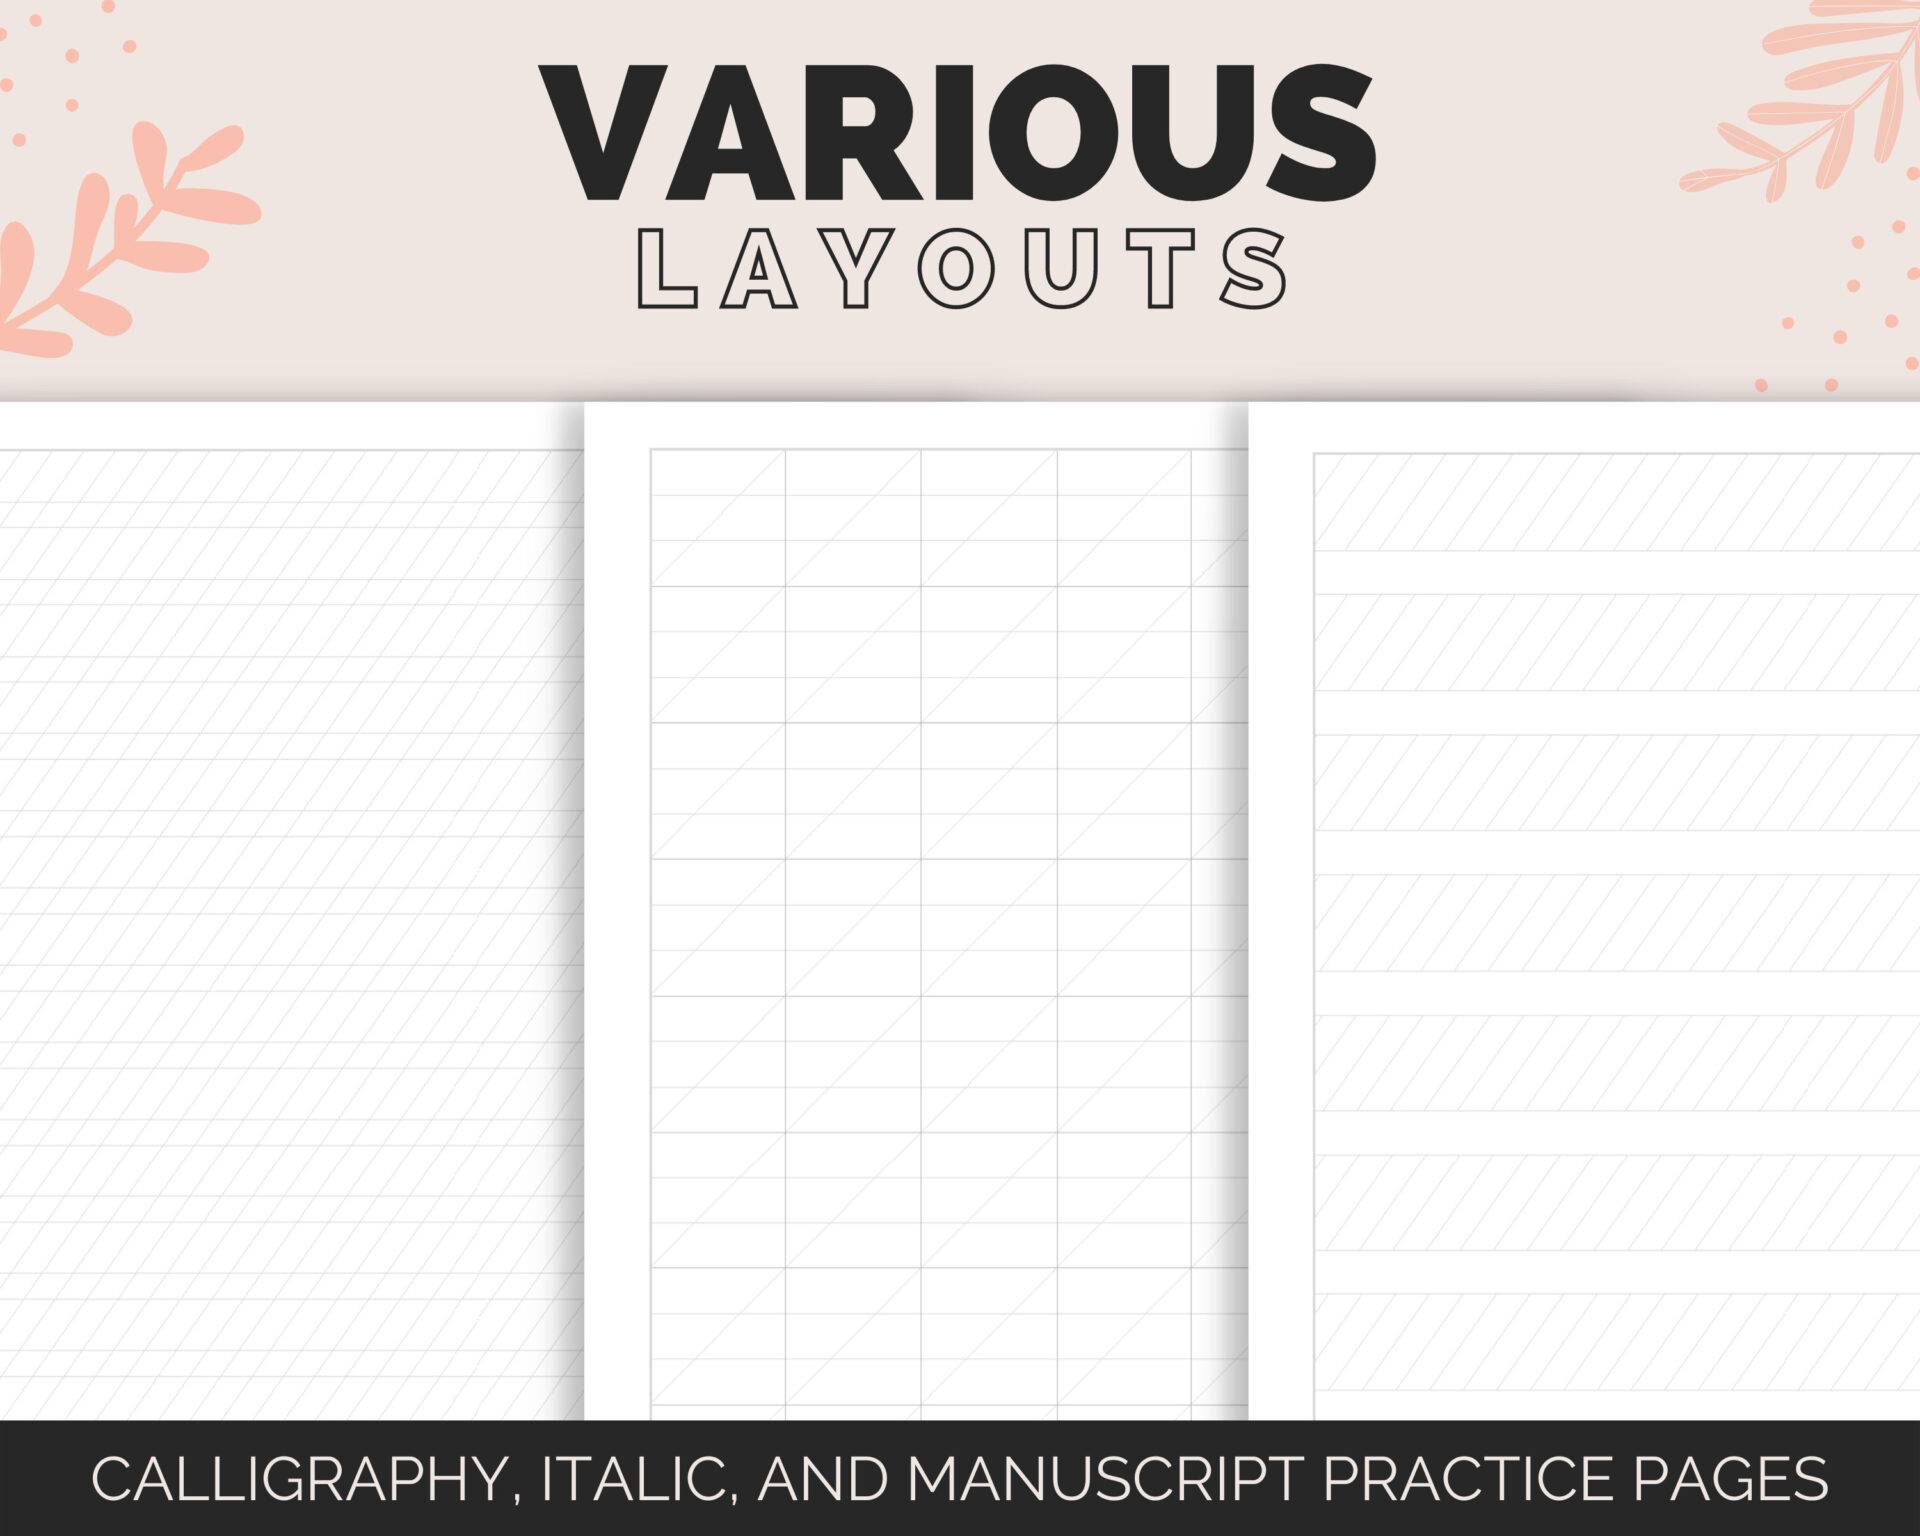 Calligraphy Practice Paper Printable - Various Layouts for hand lettering and calligraphy